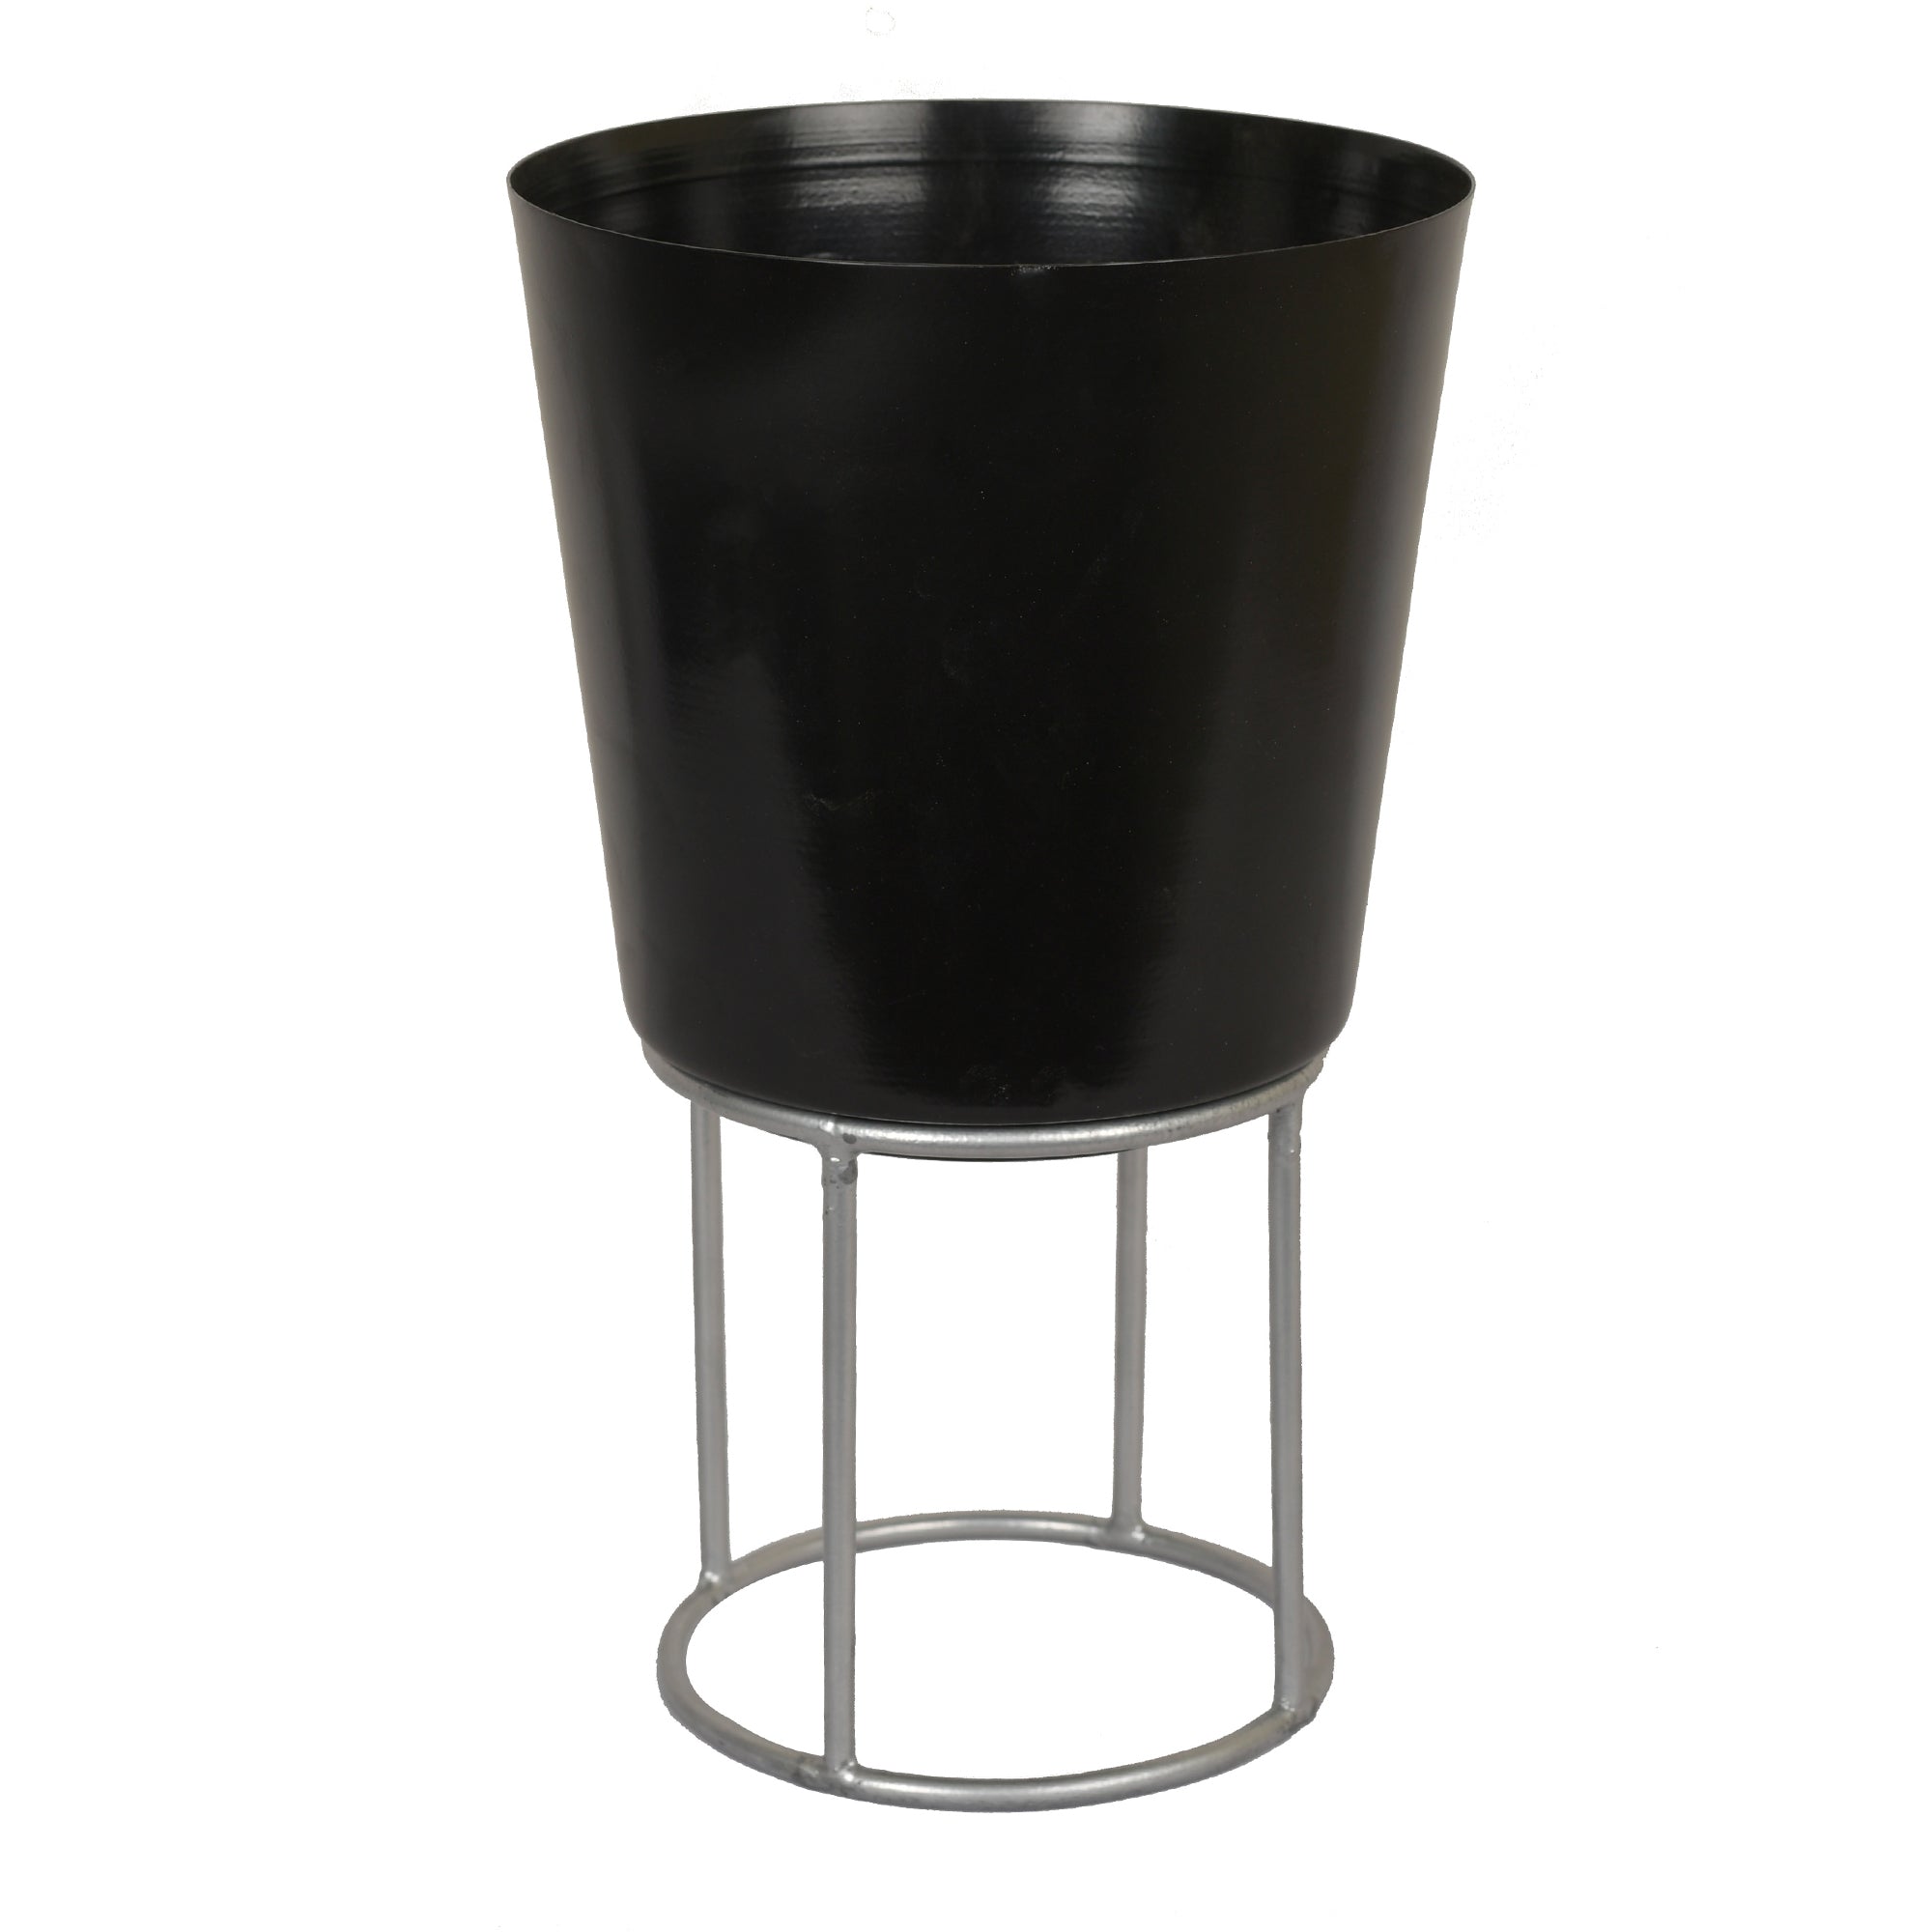 Black Planter with Metal Riser 9.6 inches